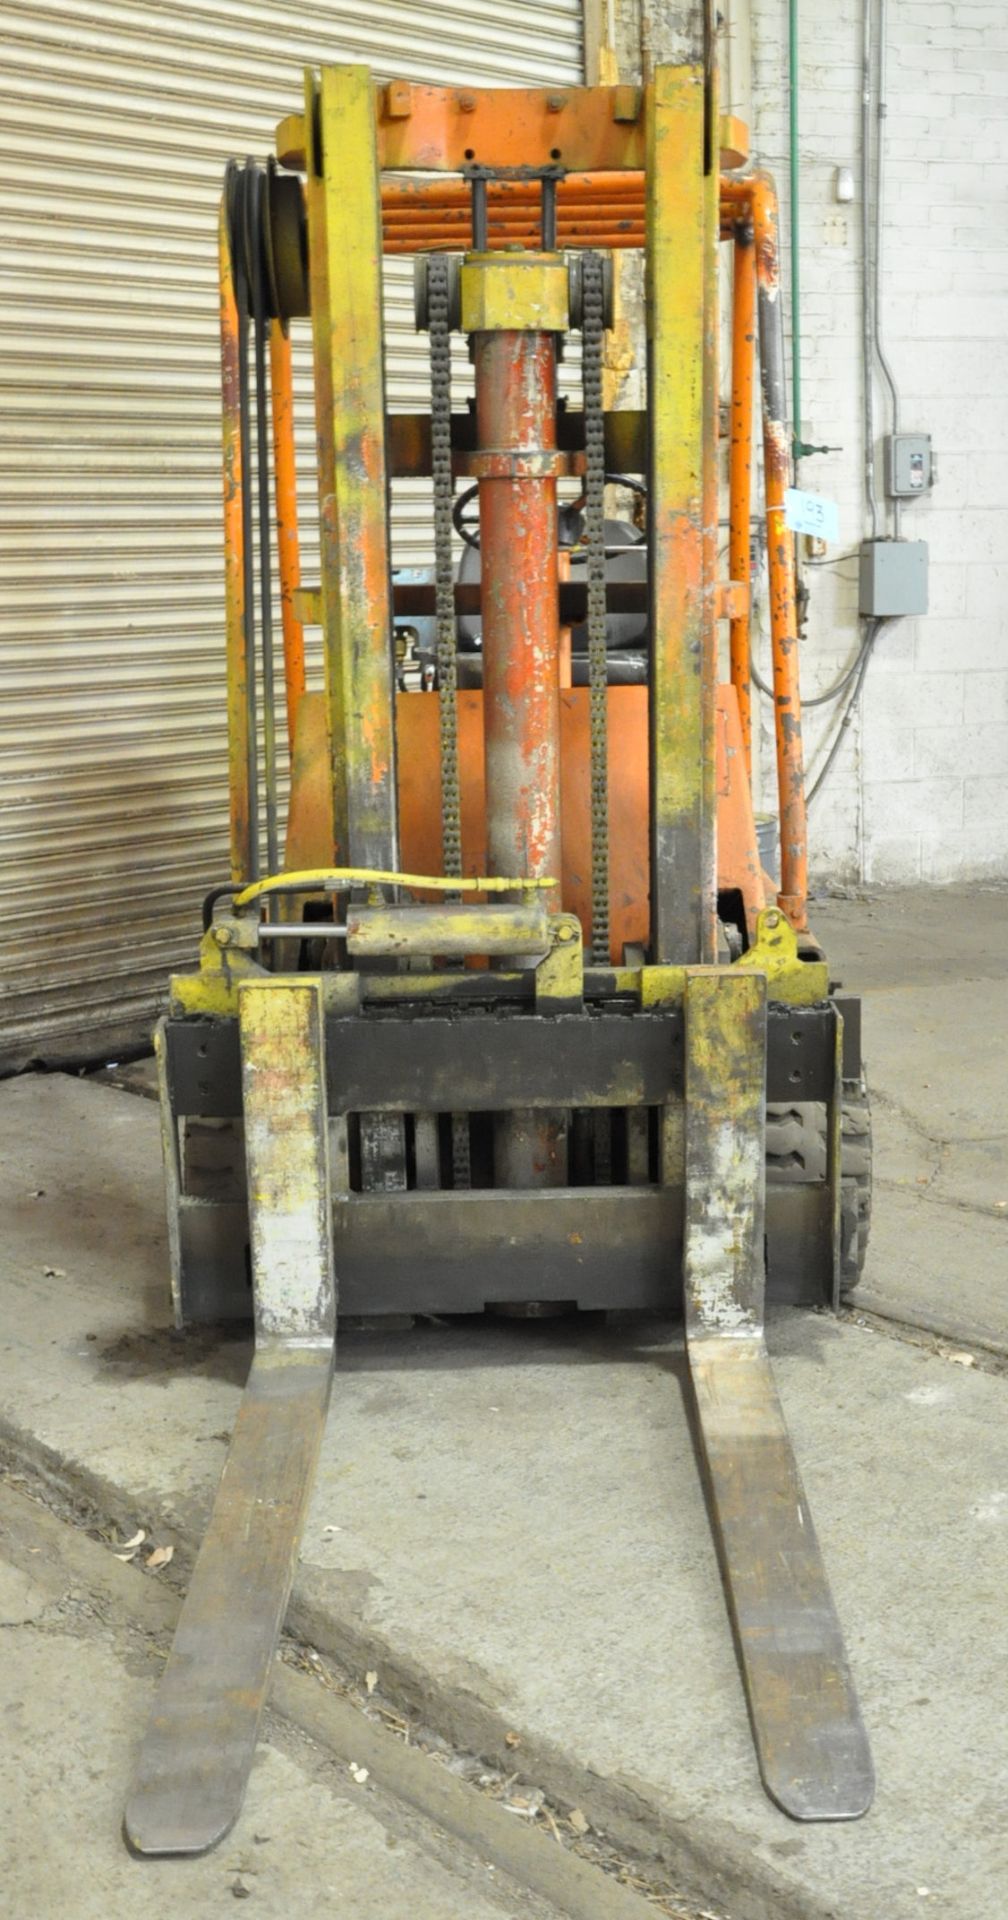 BAKER Approx. 3,000-Lbs. x 156" Lift Capacity LP Gas Forklift Truck, 2-Stage Mast, Side Shift - Image 4 of 6